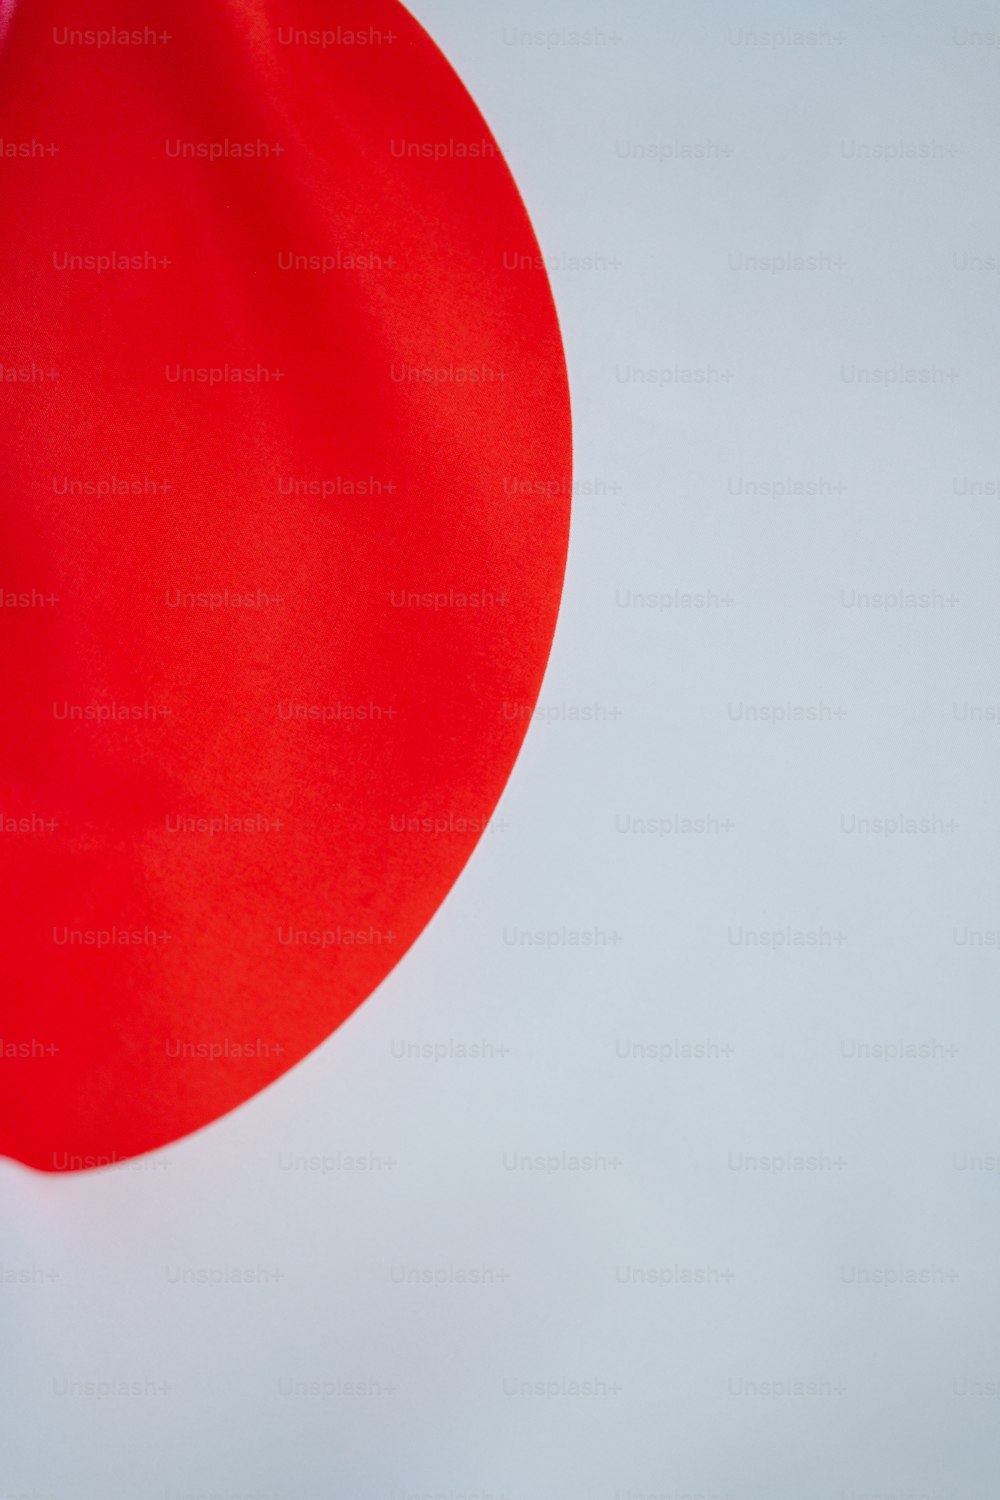 a red circle on a white background